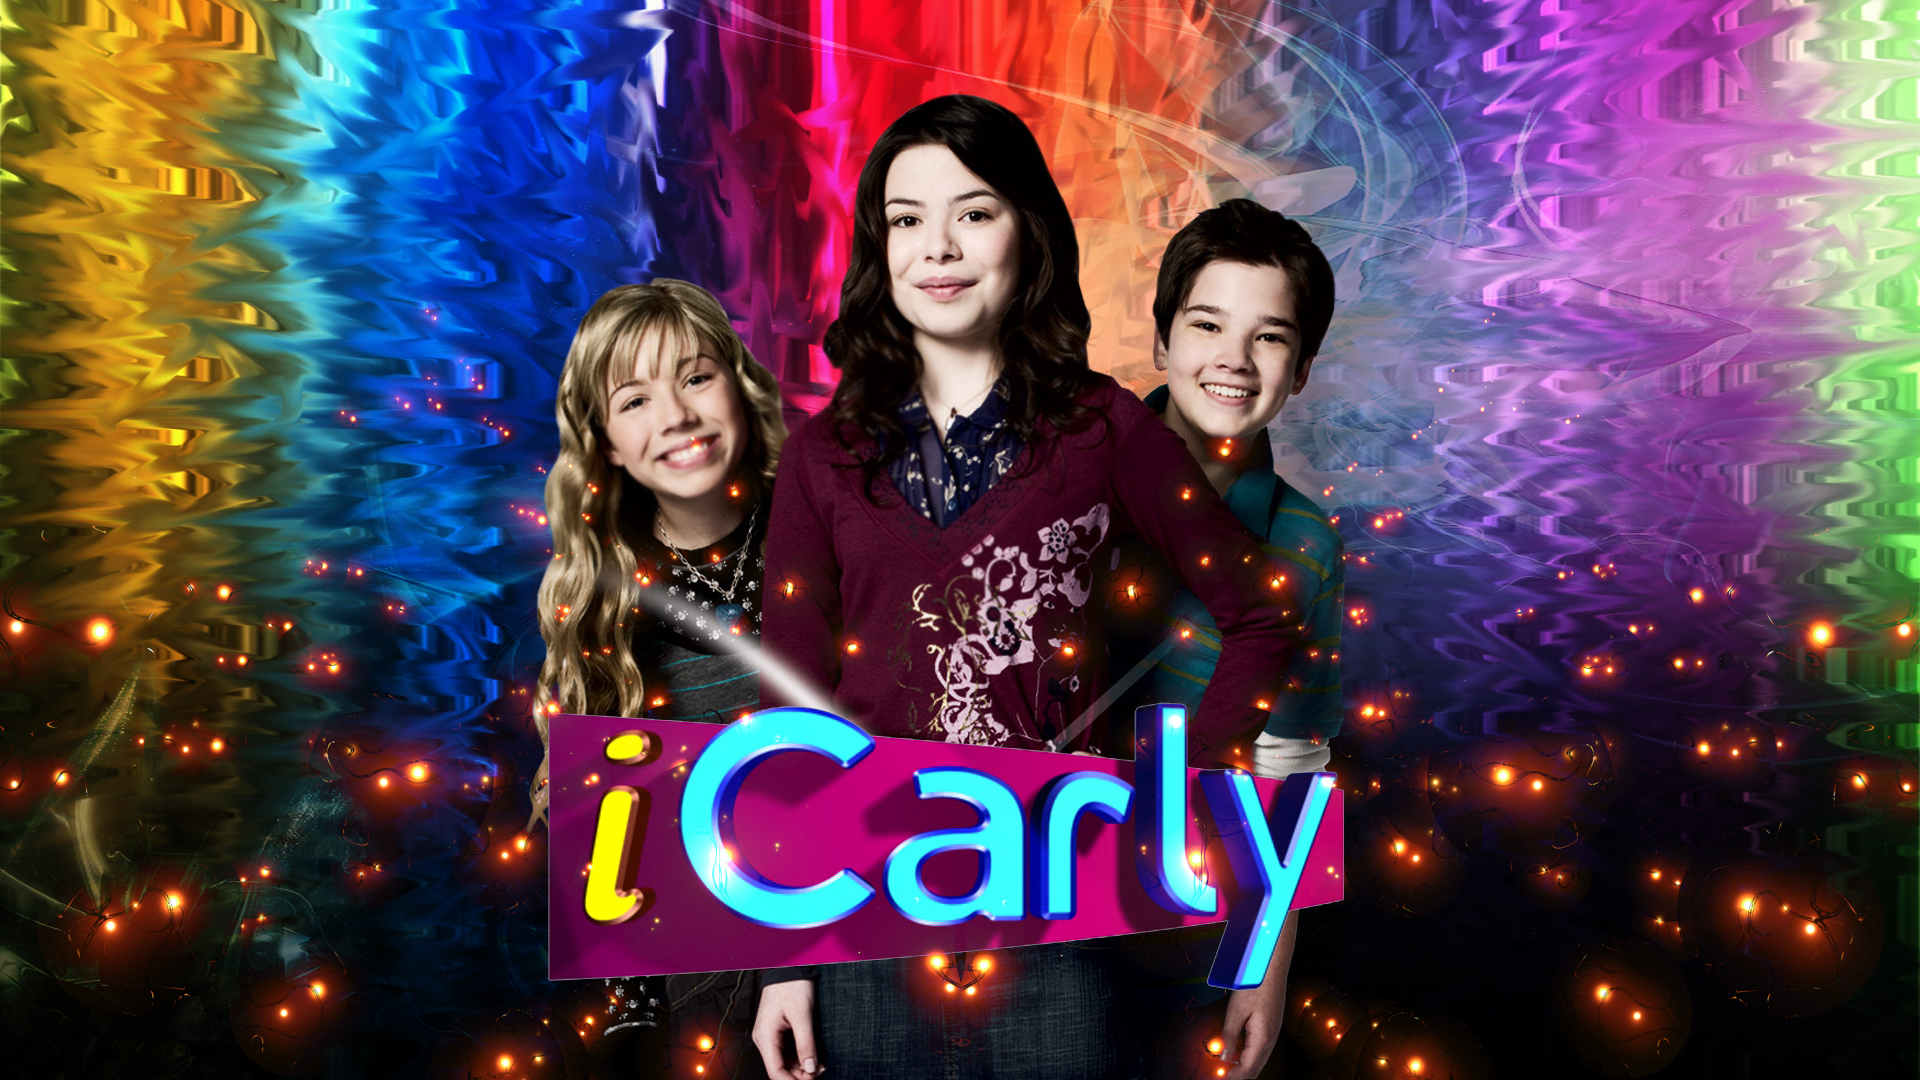 Icarly Theme Song Movie Songs Tv Soundtracks